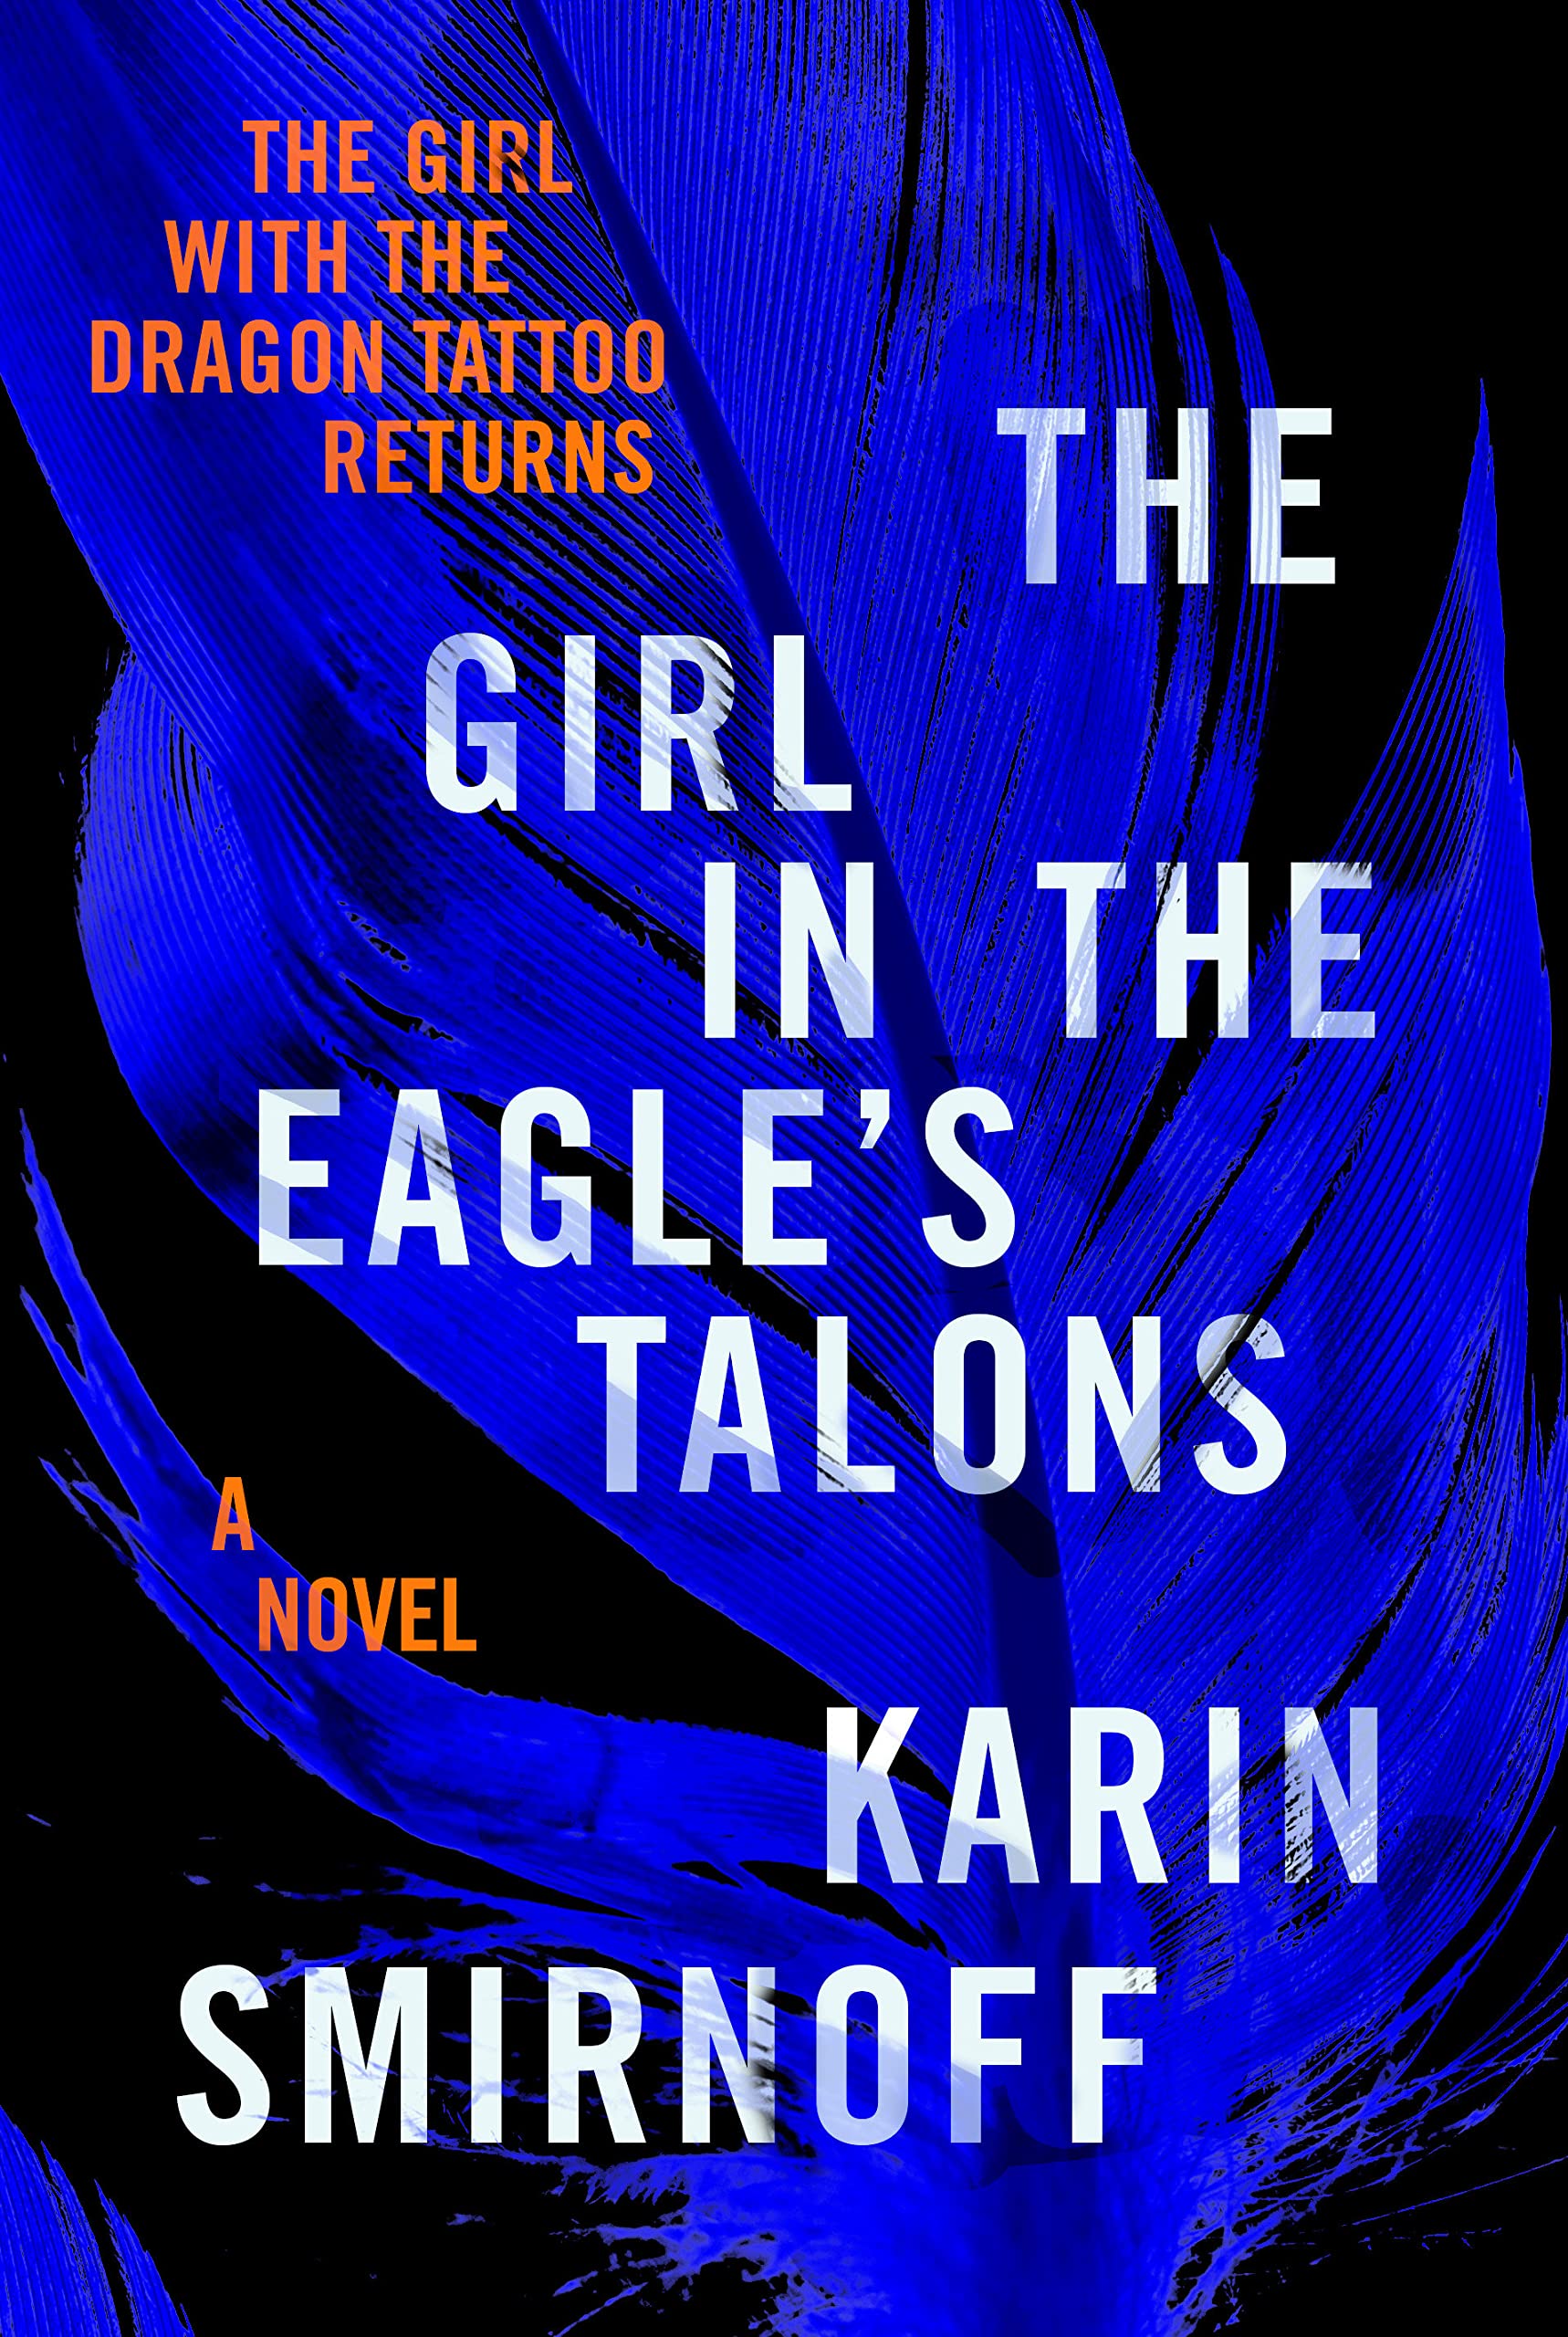 Image for "The Girl in the Eagles Talons"